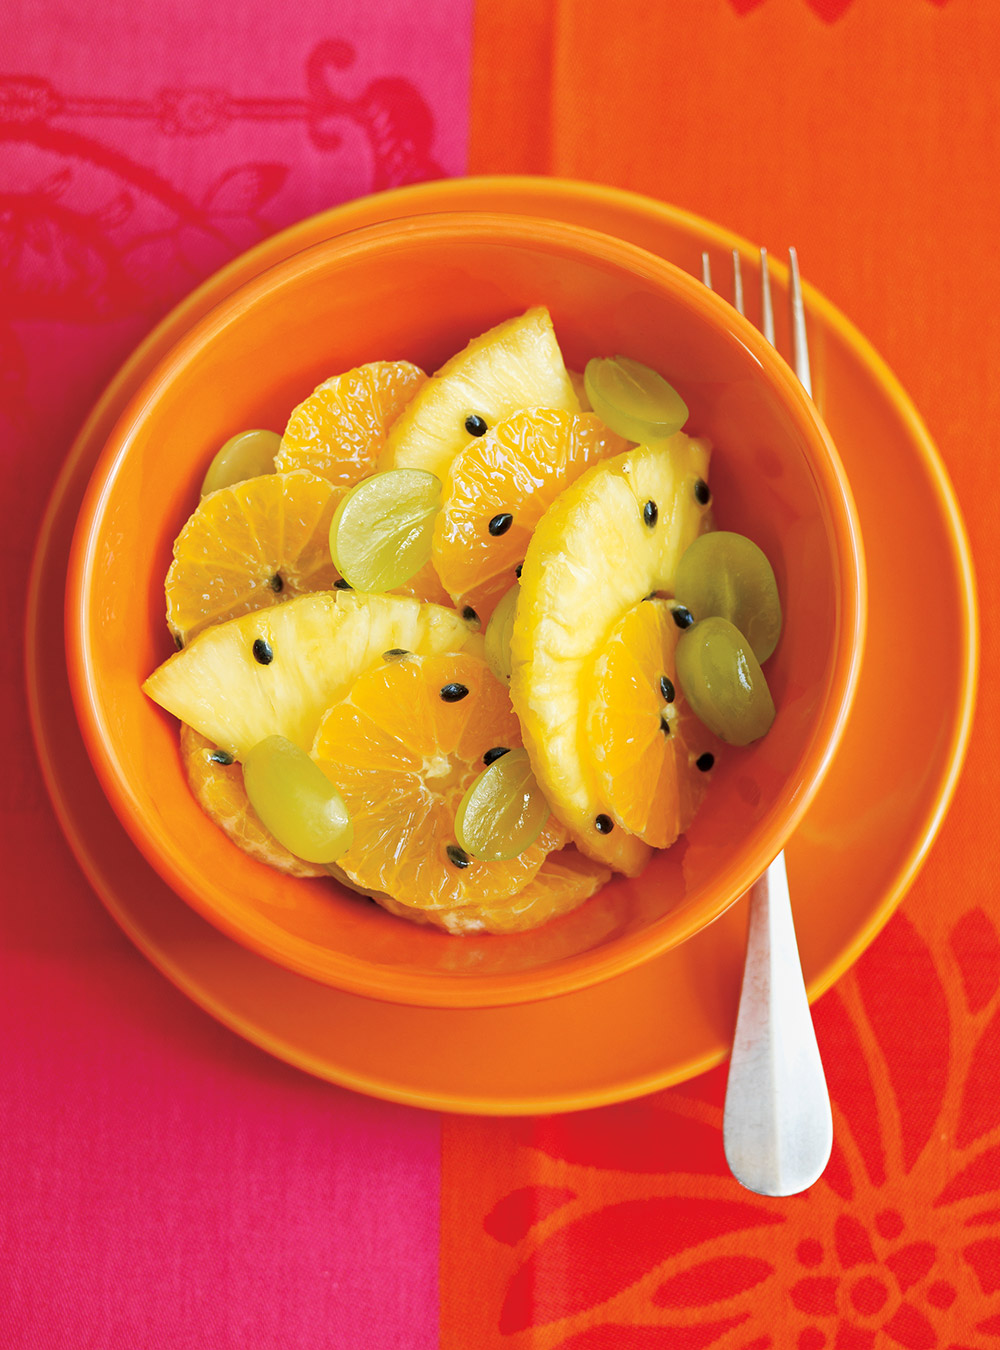 Clementine and Passion Fruit Salad